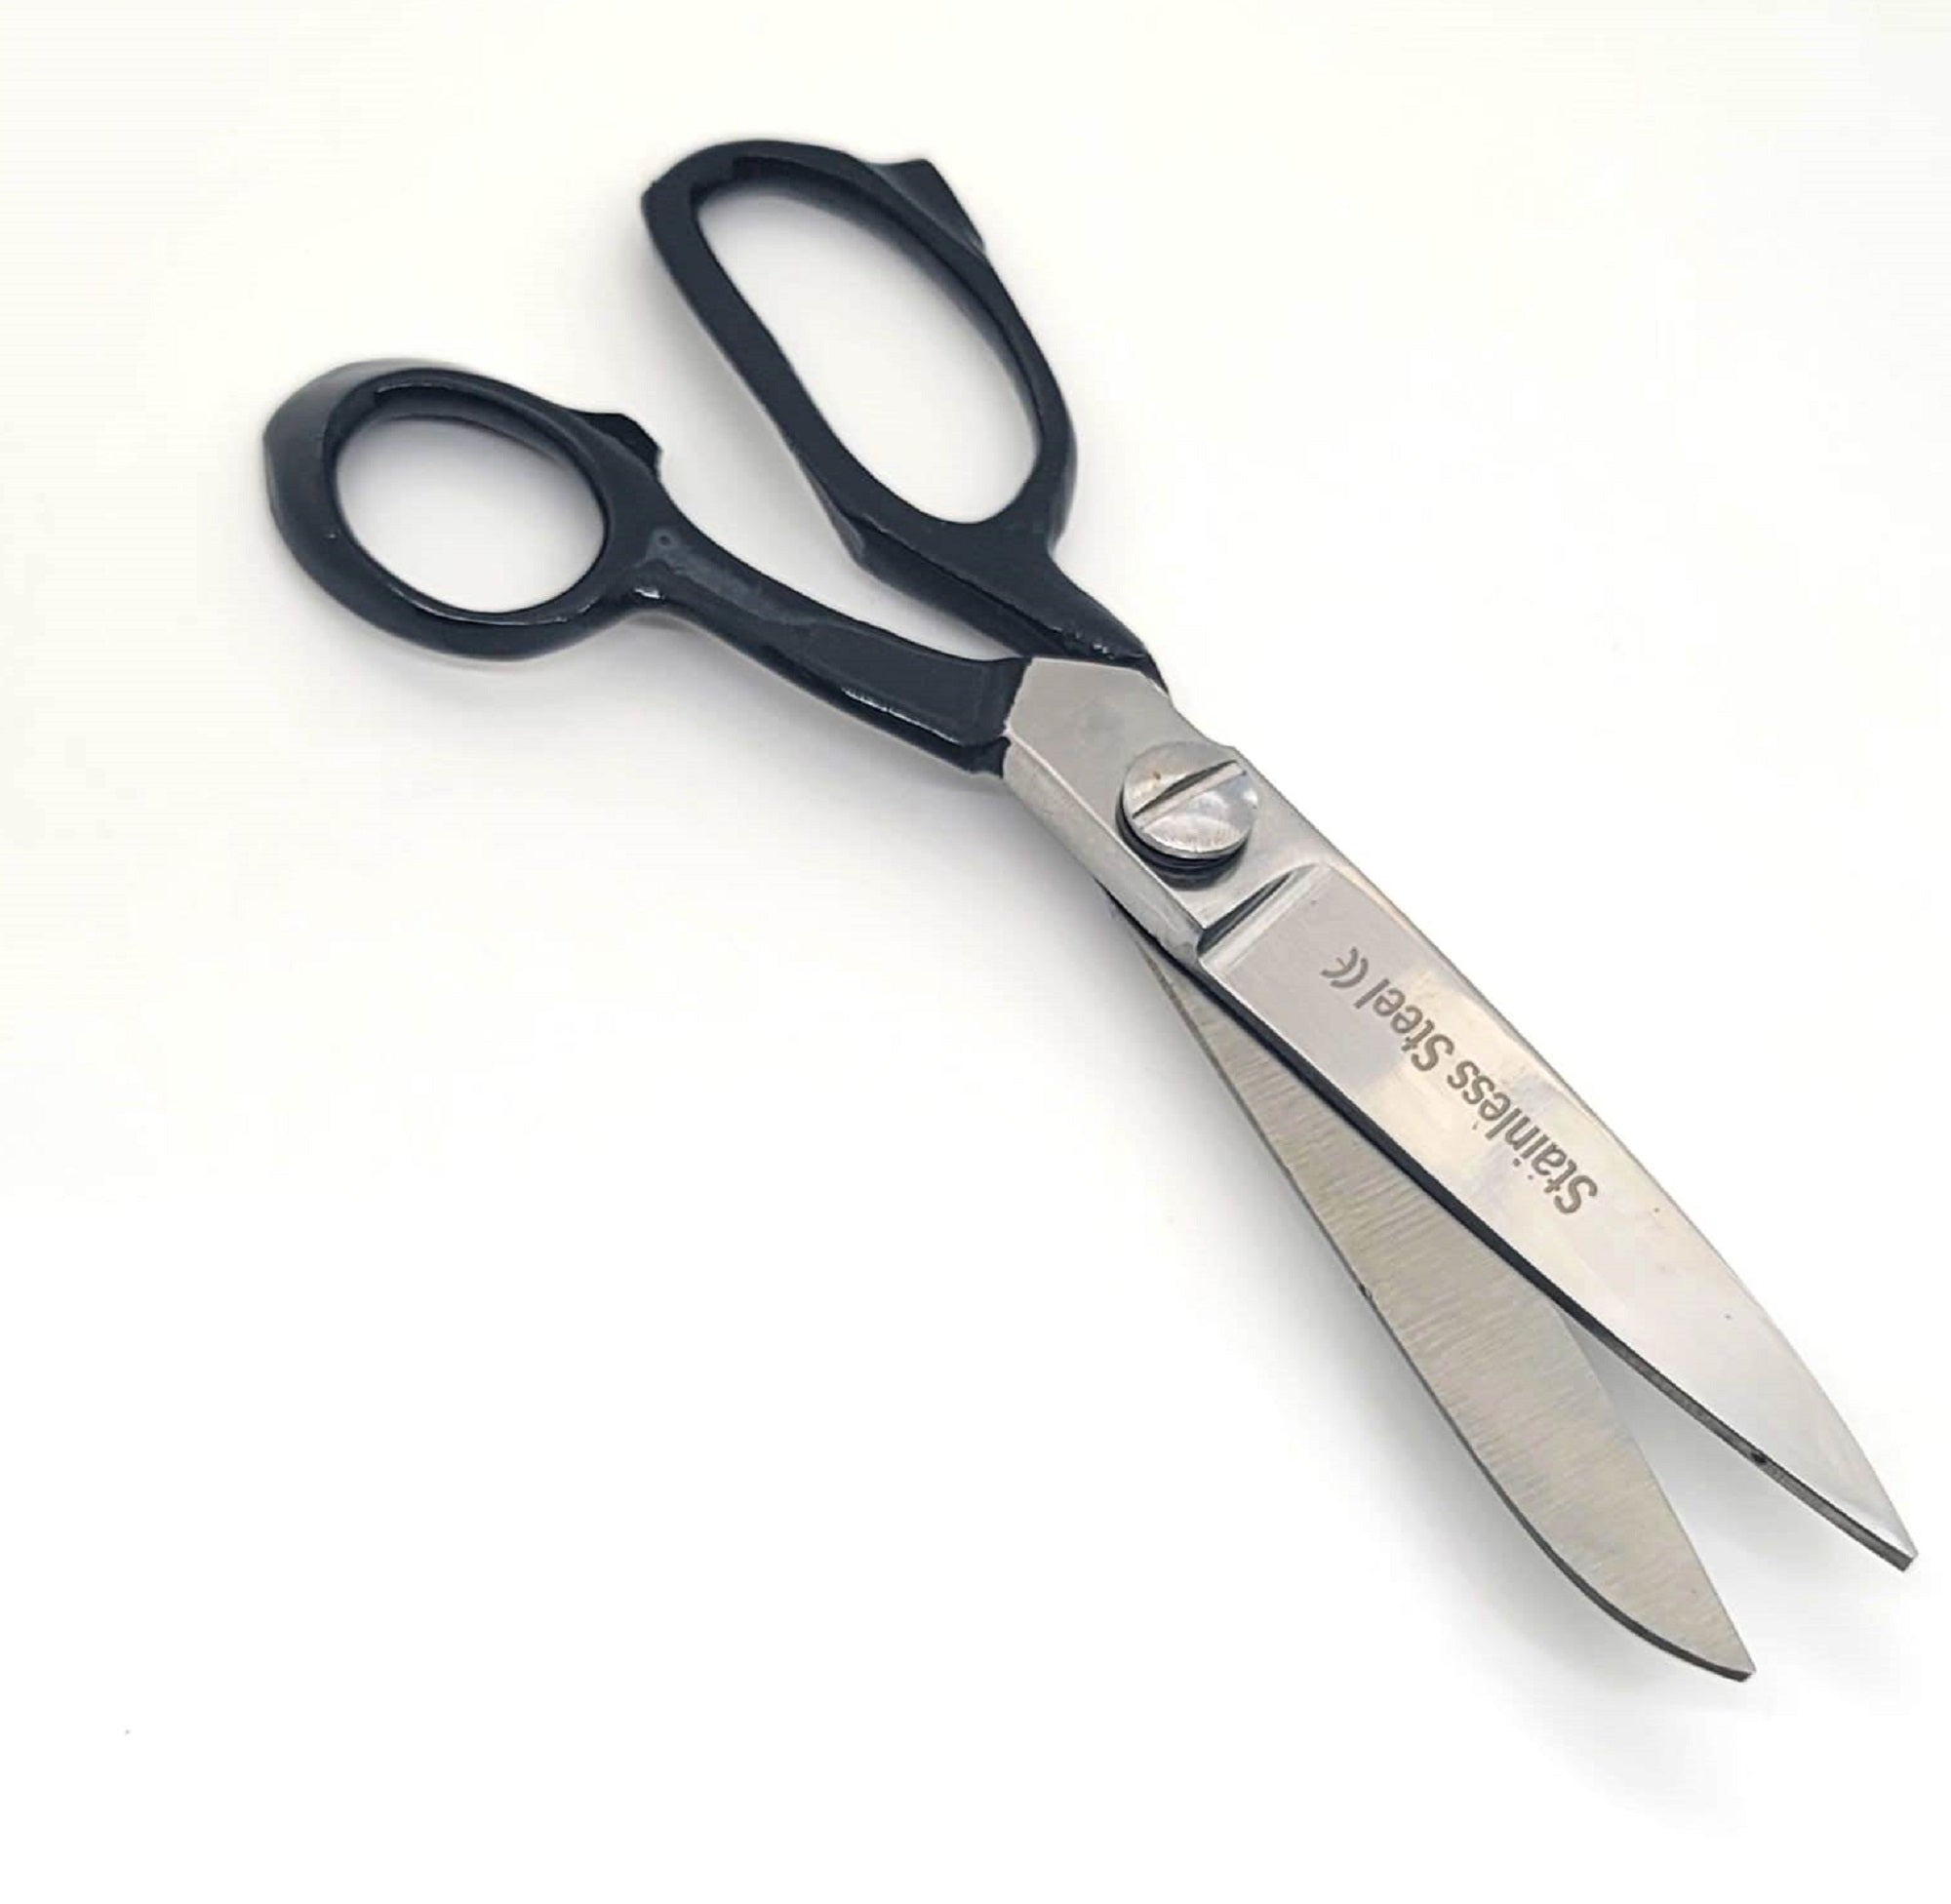 Tailor Scissors , 14 Sewing Dressmaking Upholstery Fabric cutting